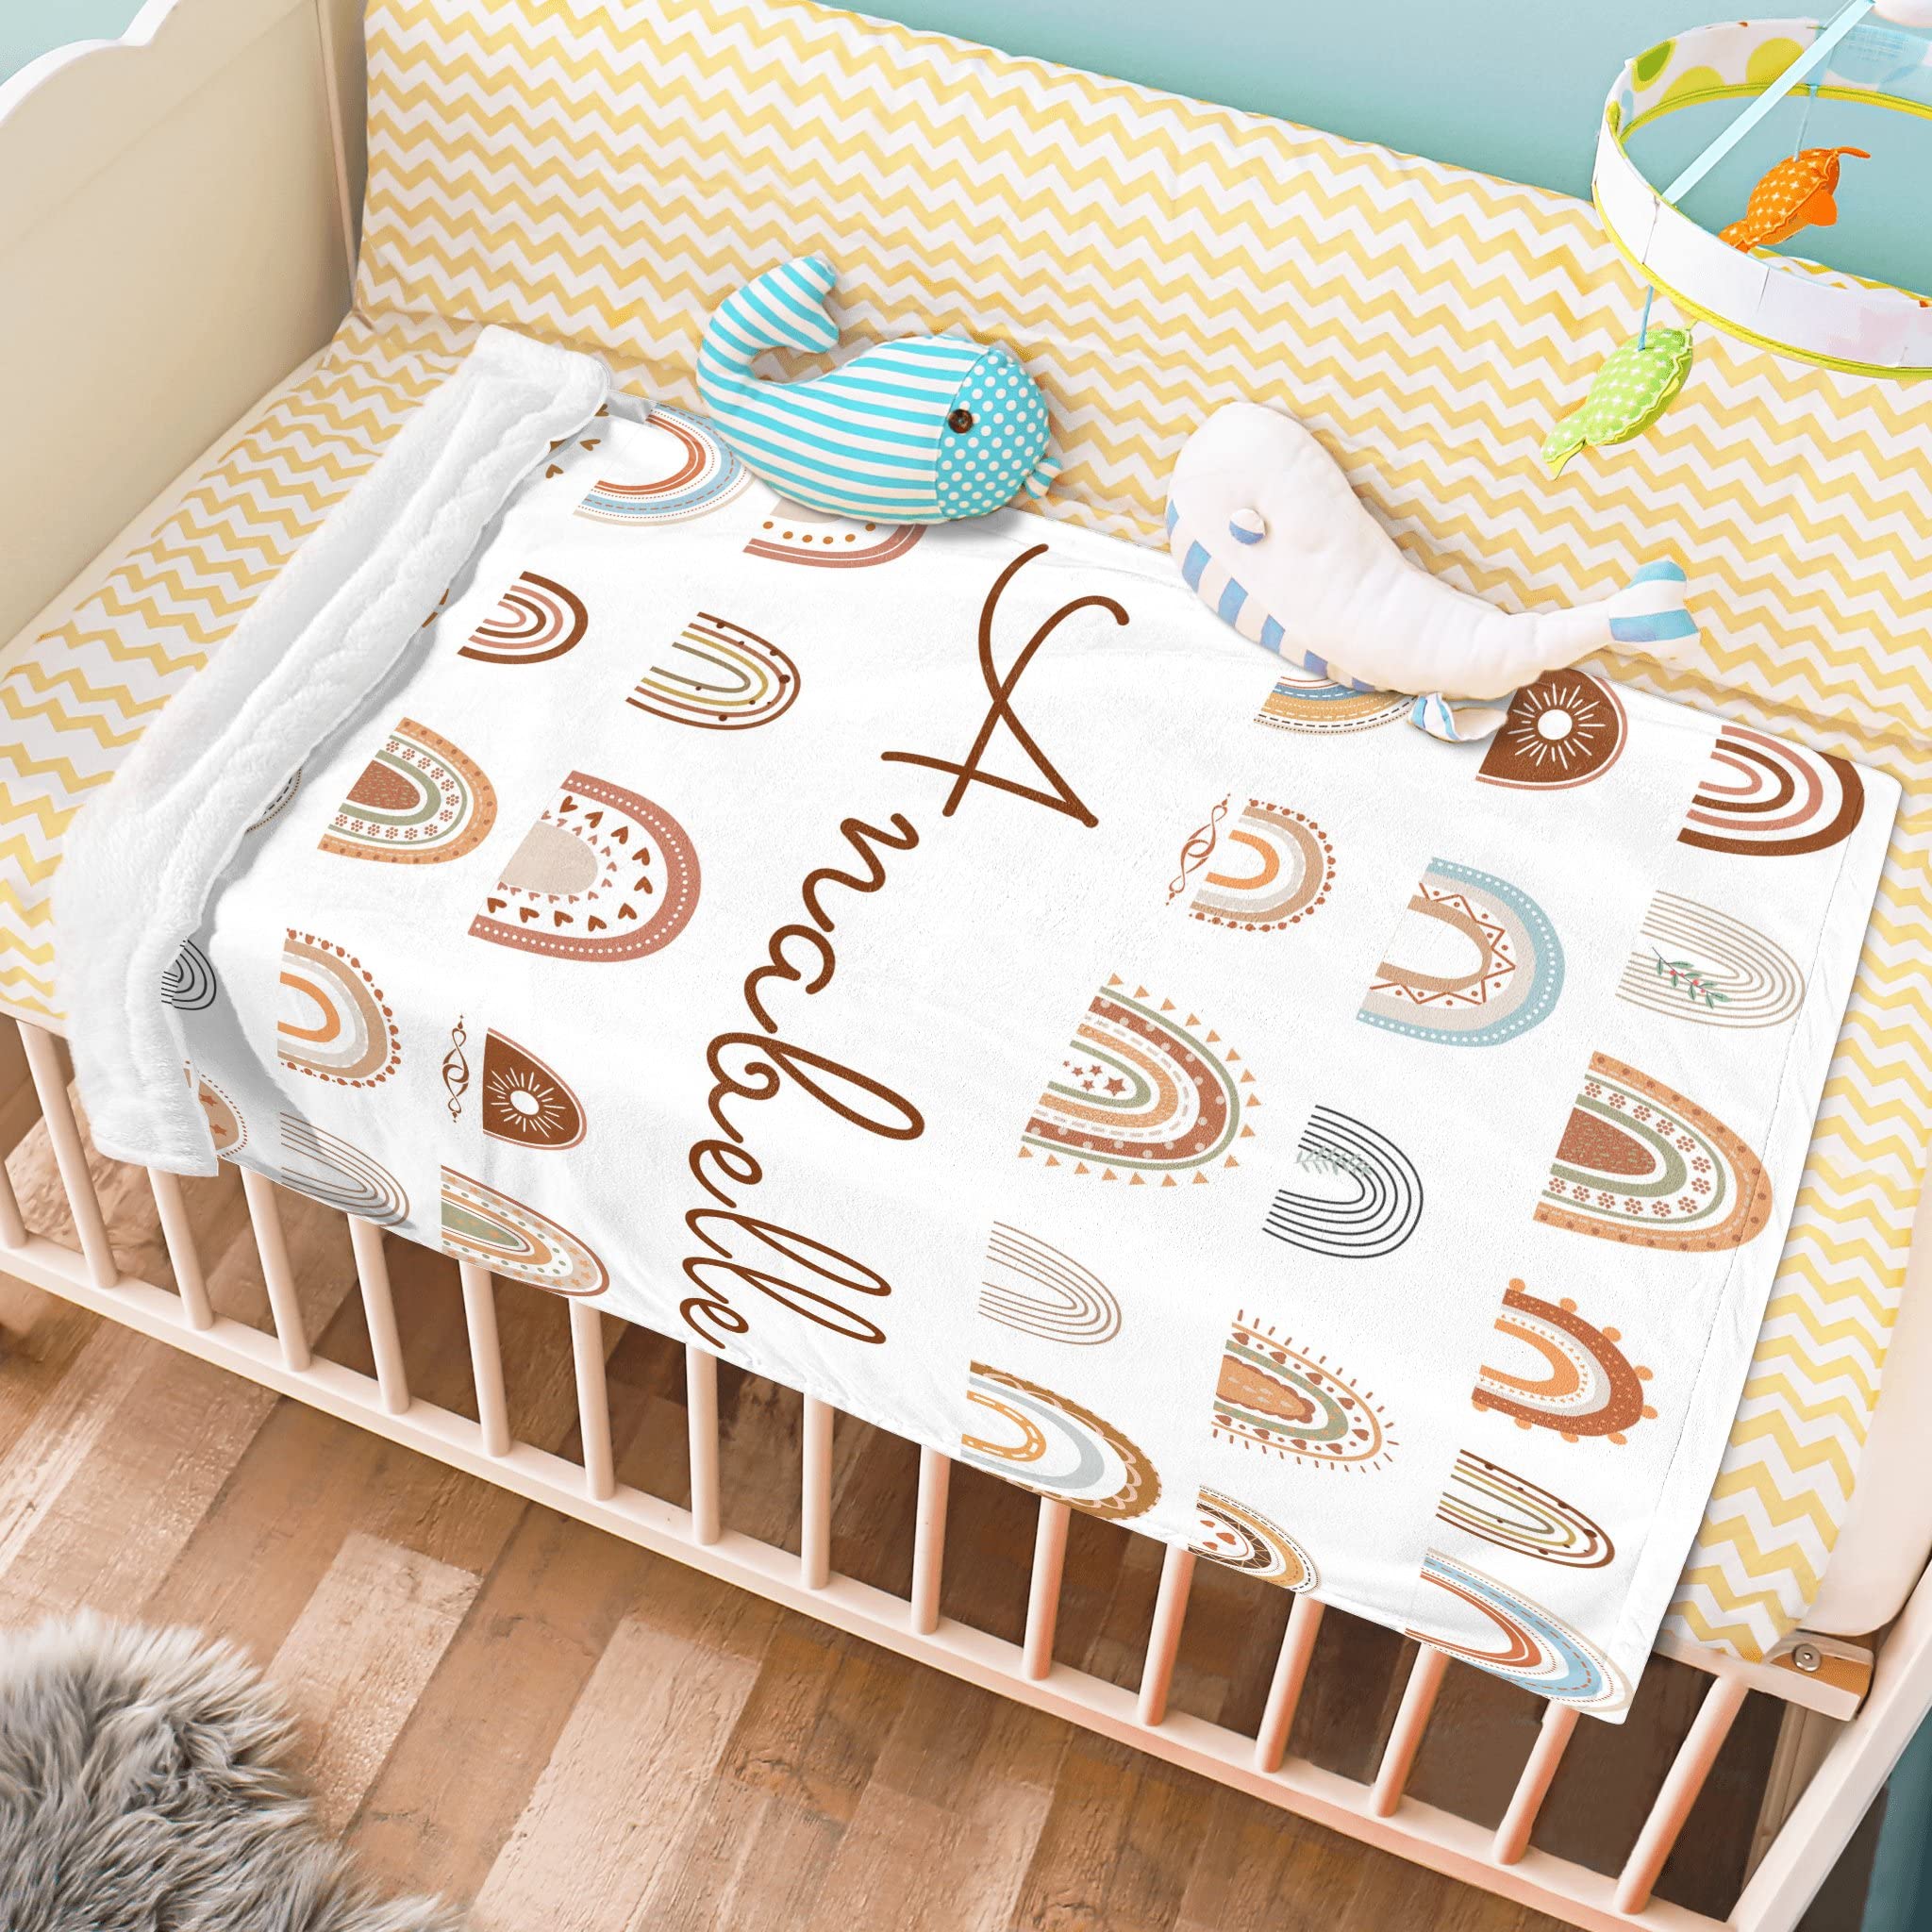 Youltar Personalized Baby Blanket with Rainbow Pattern Girl Name Custom Soft and Comfortable for Girls Newbornses sentials, Kids